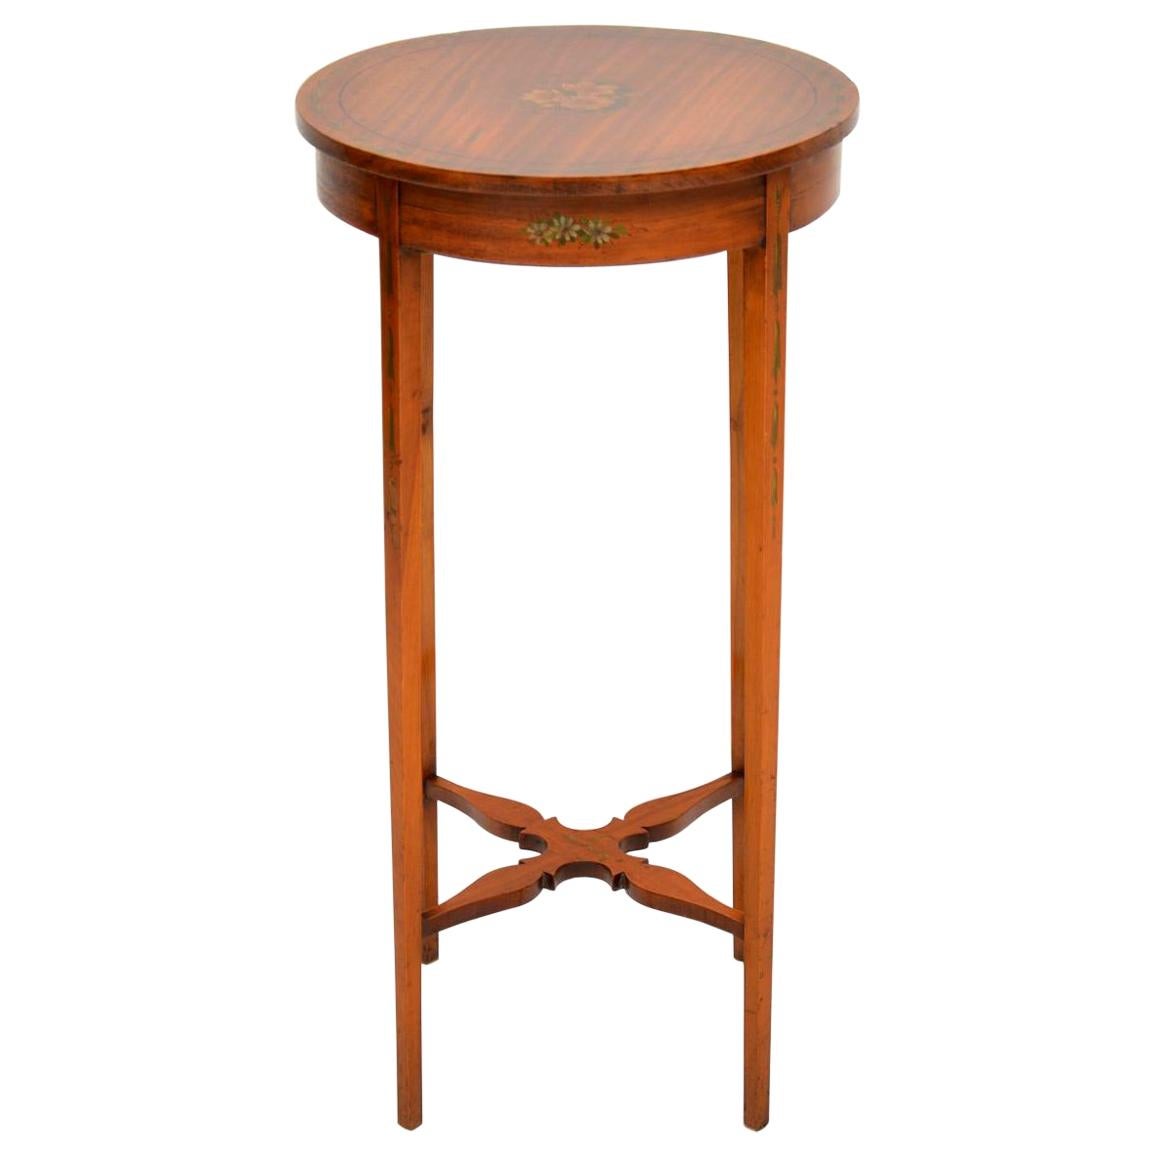 Antique Edwardian Painted Satin Wood Side Table